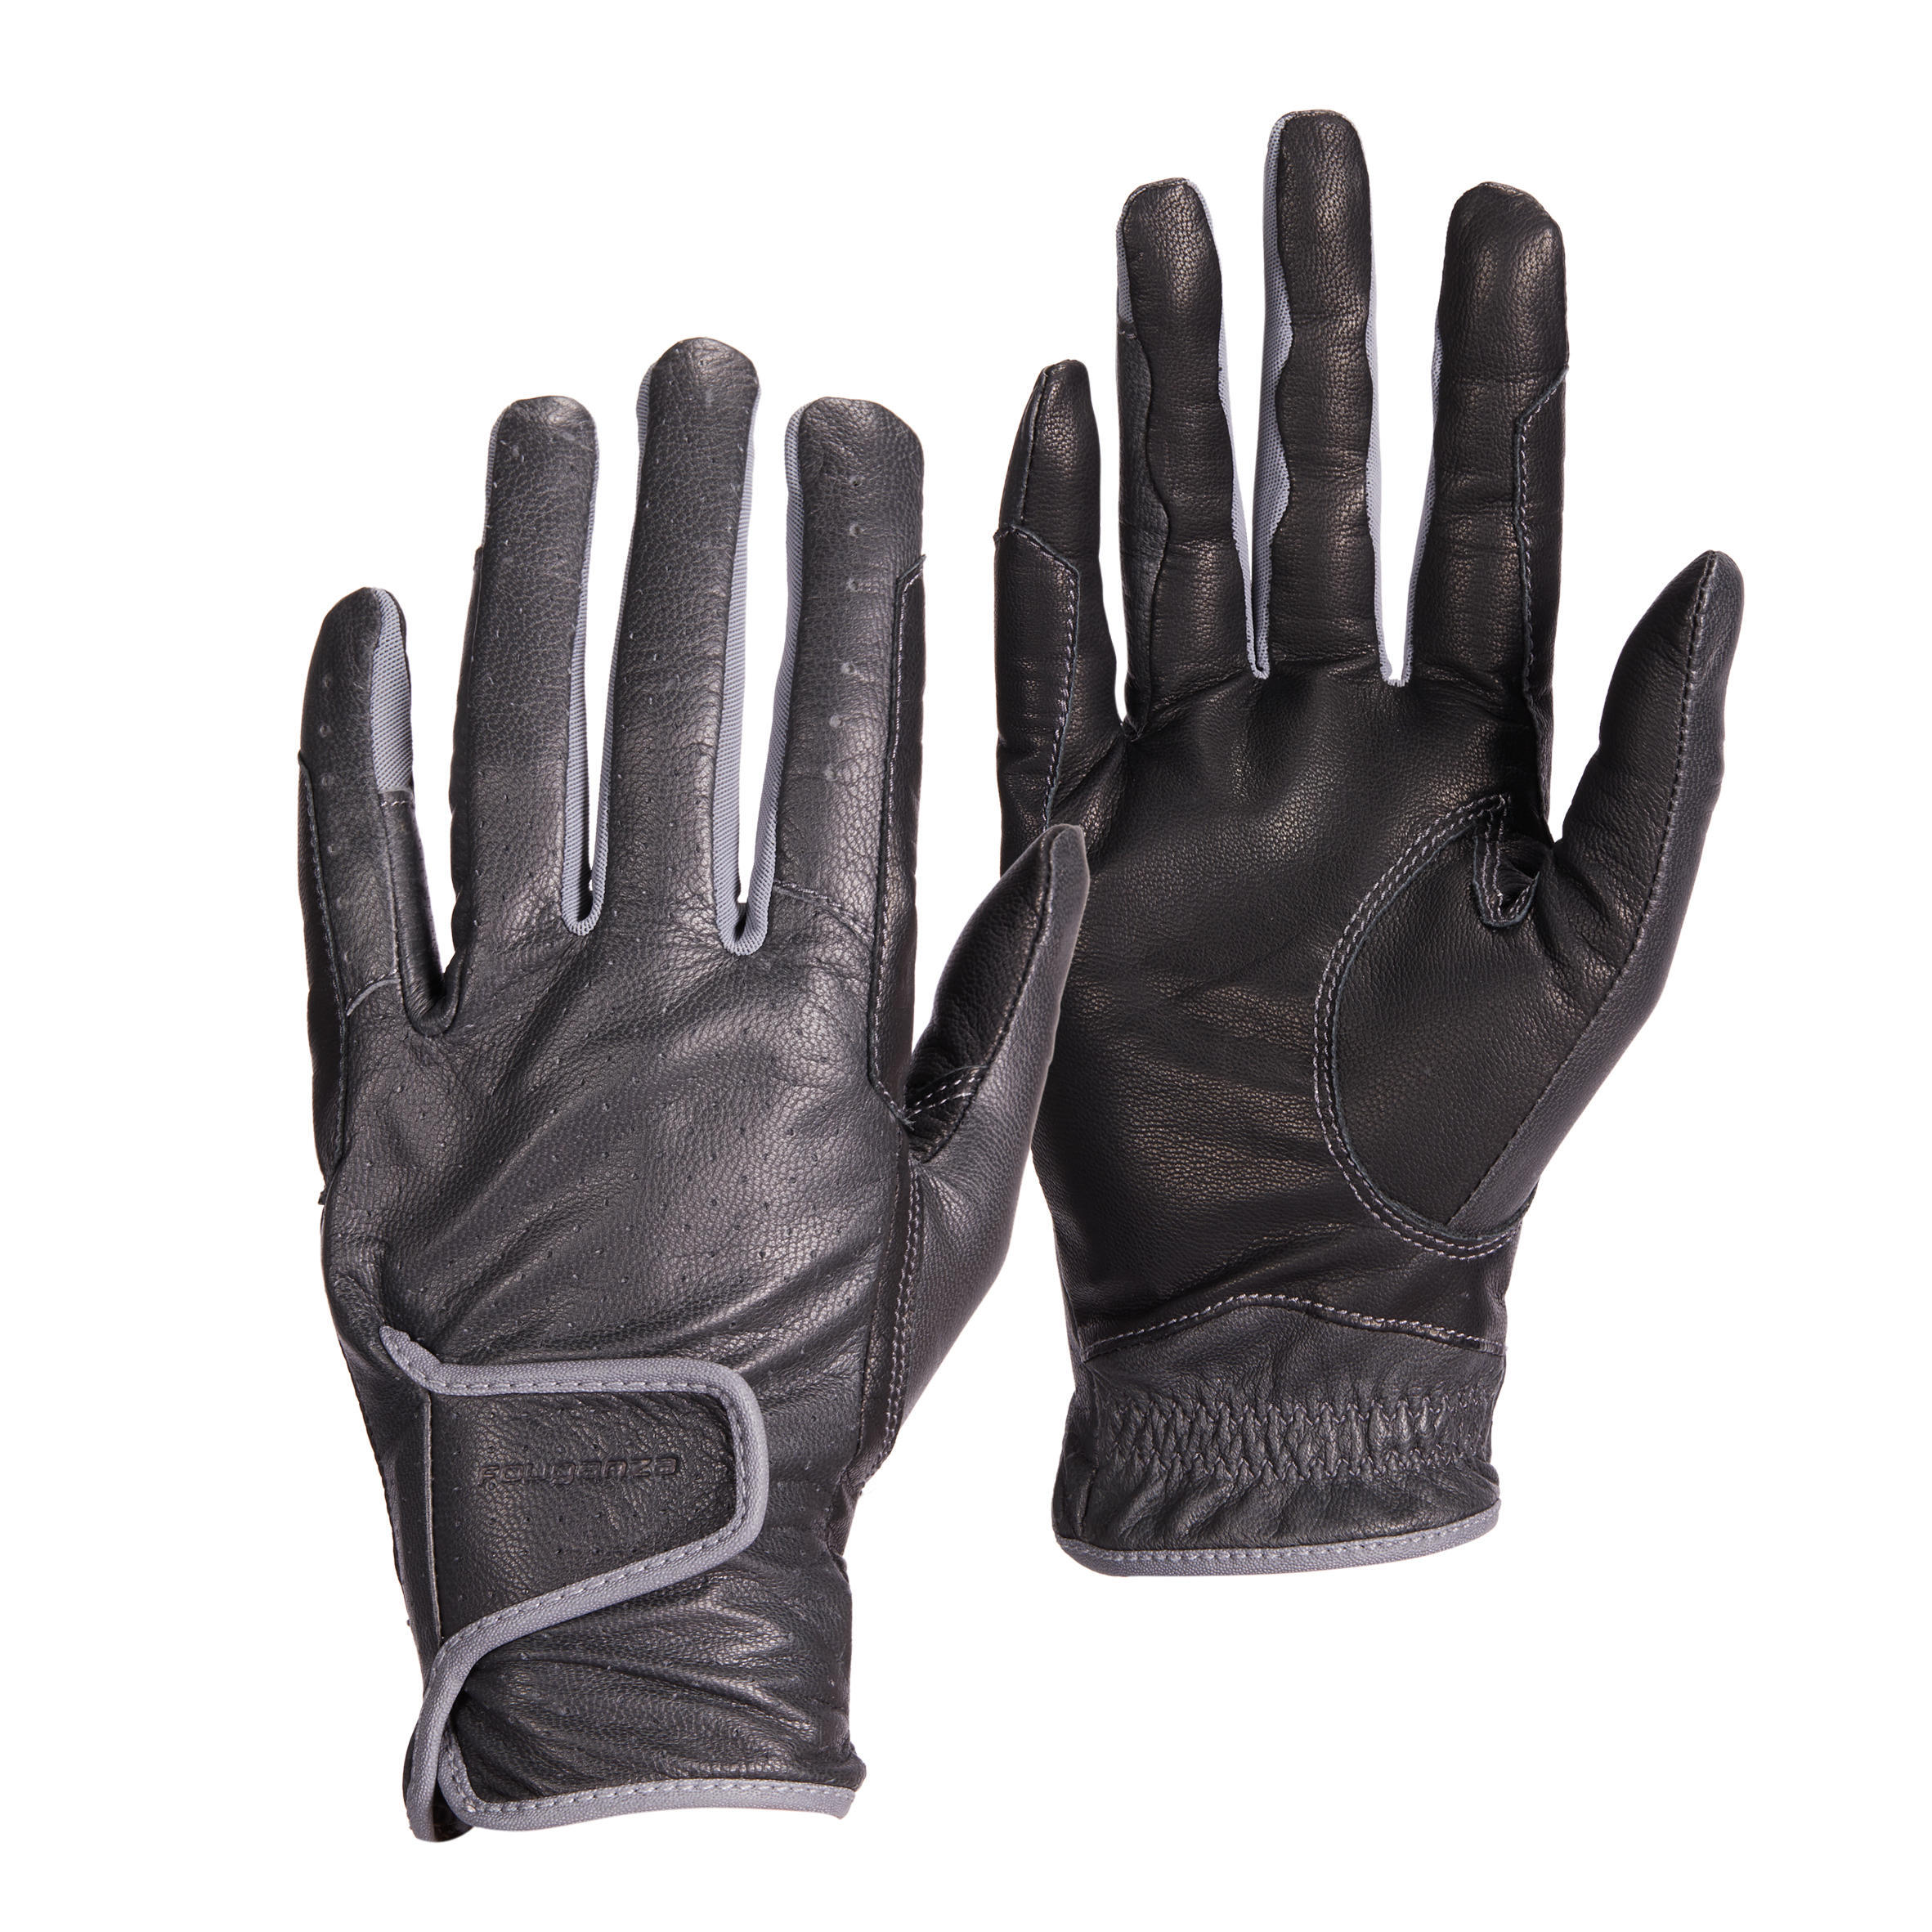 Women's Horse Riding Leather Gloves 900 - Black 3/7